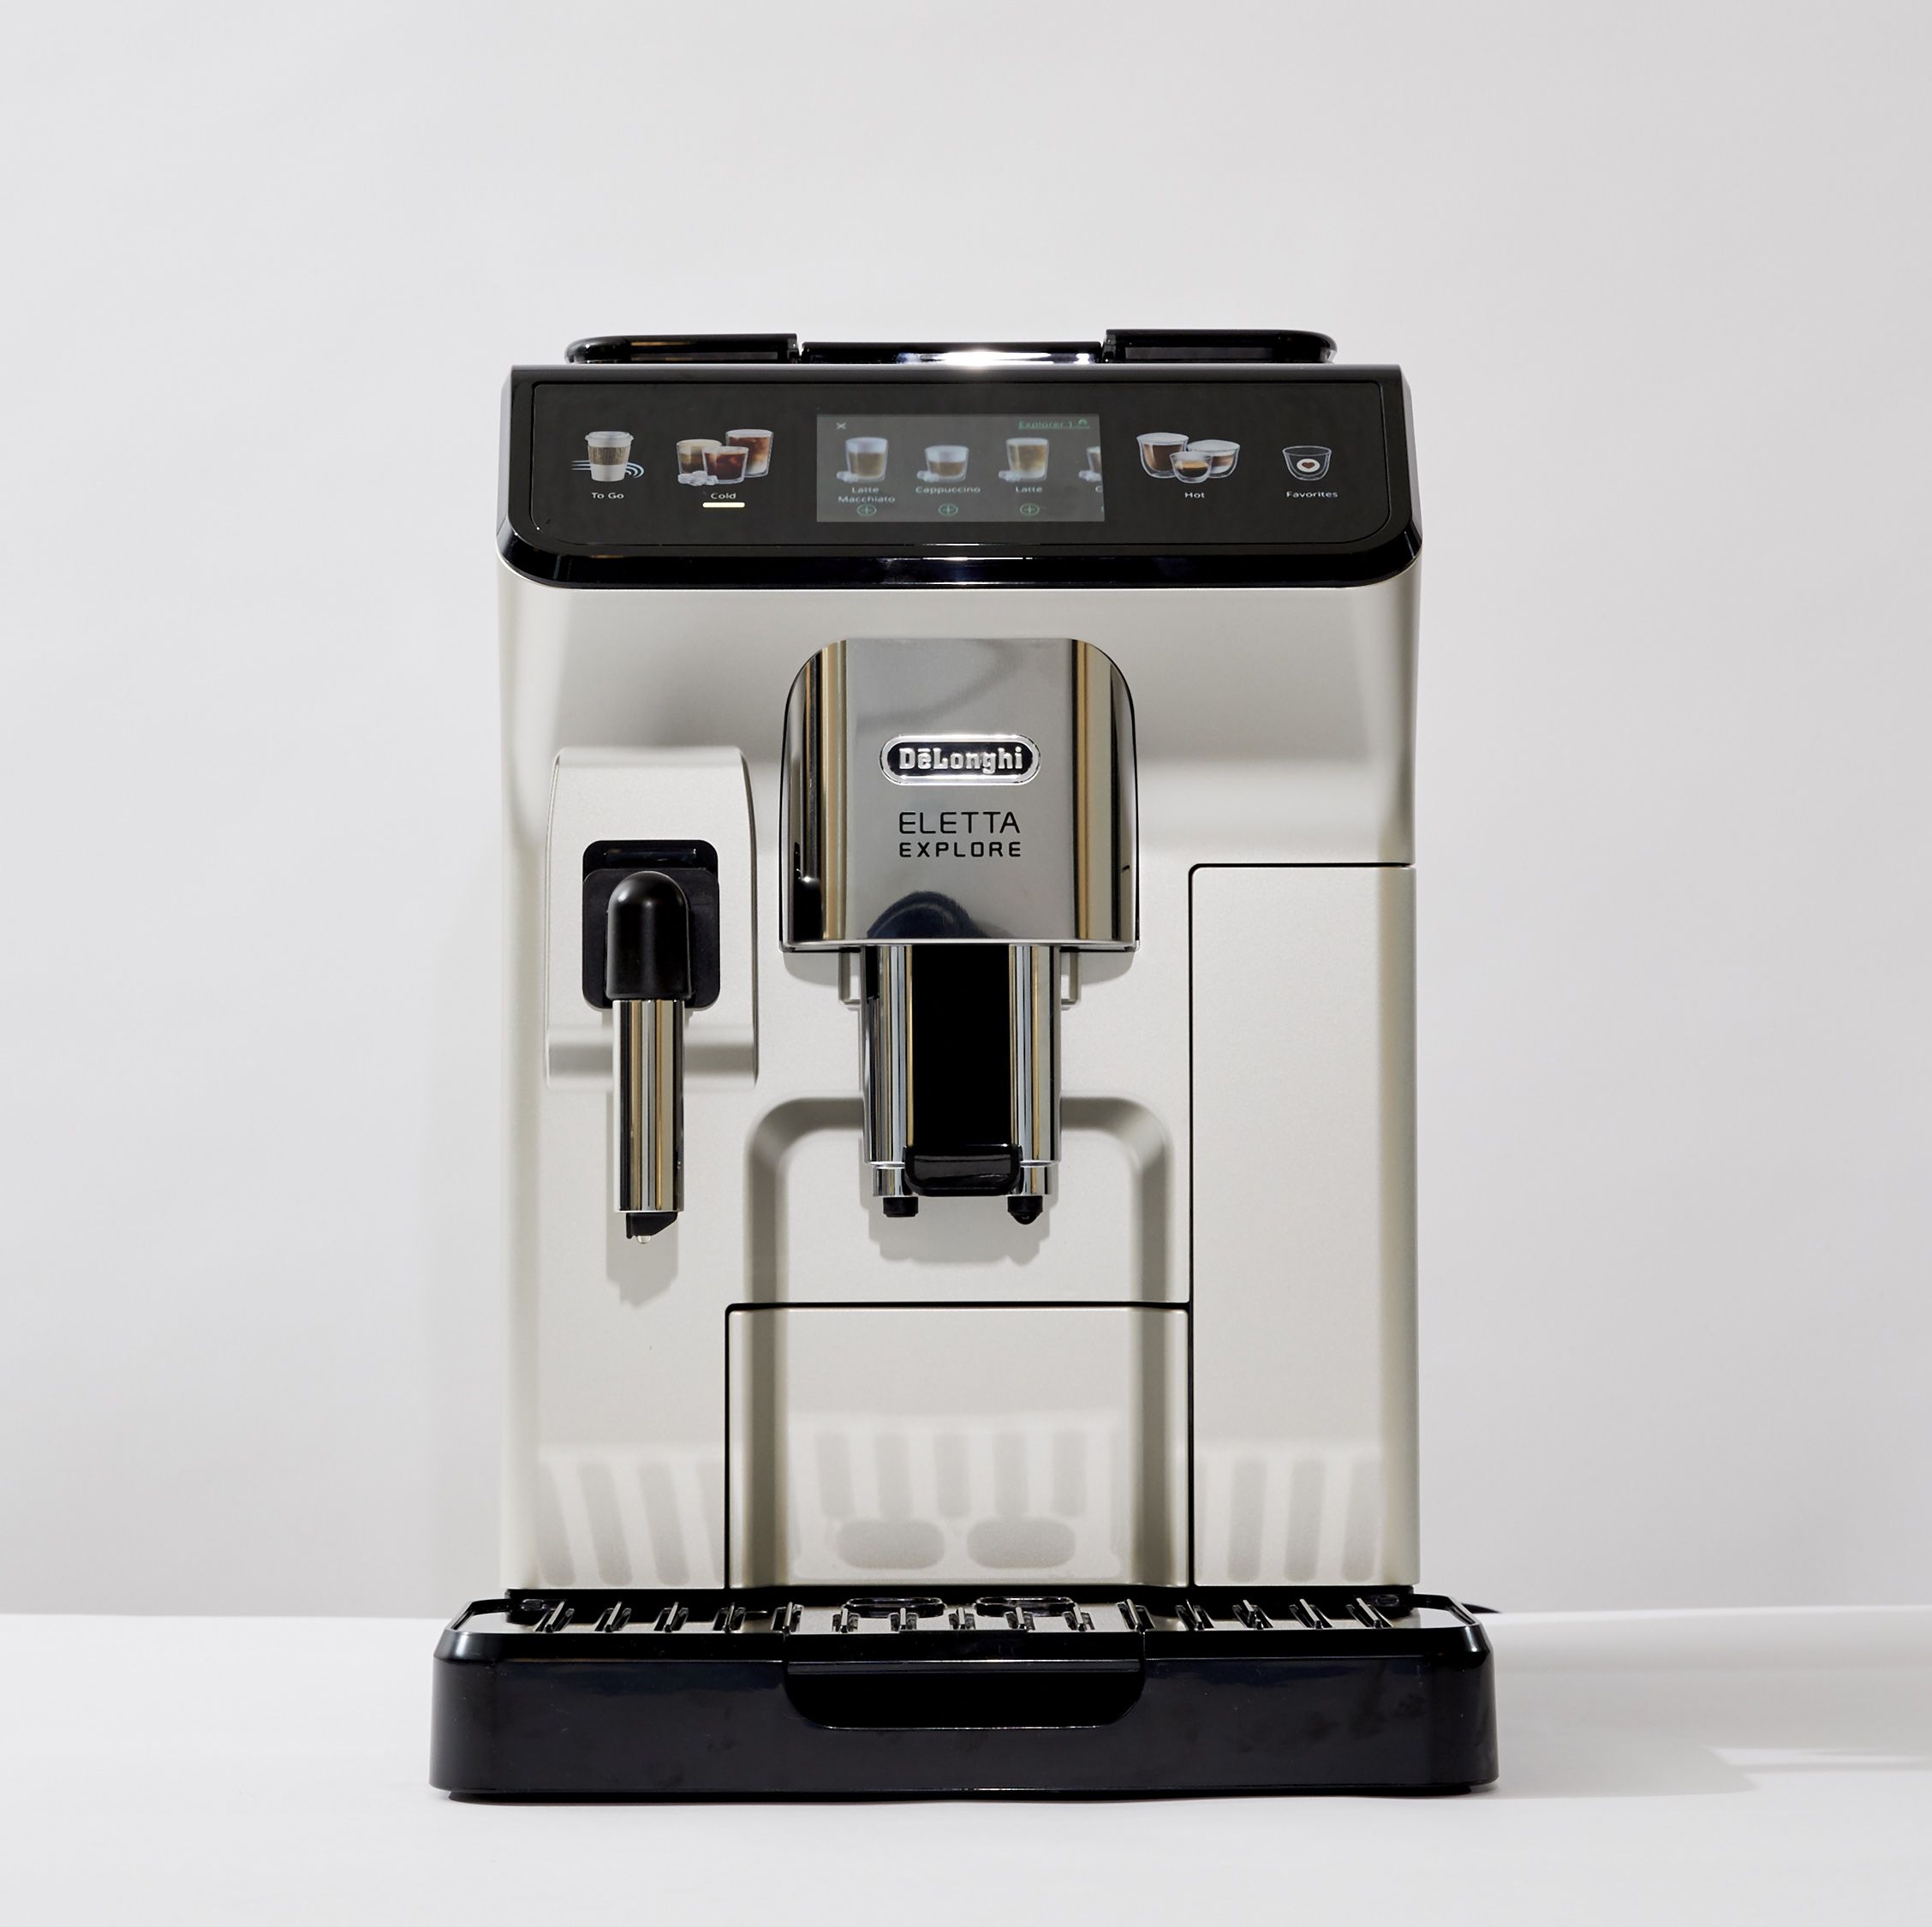 DeLonghi's New Machine Offers More Than Just Espresso. Literally.